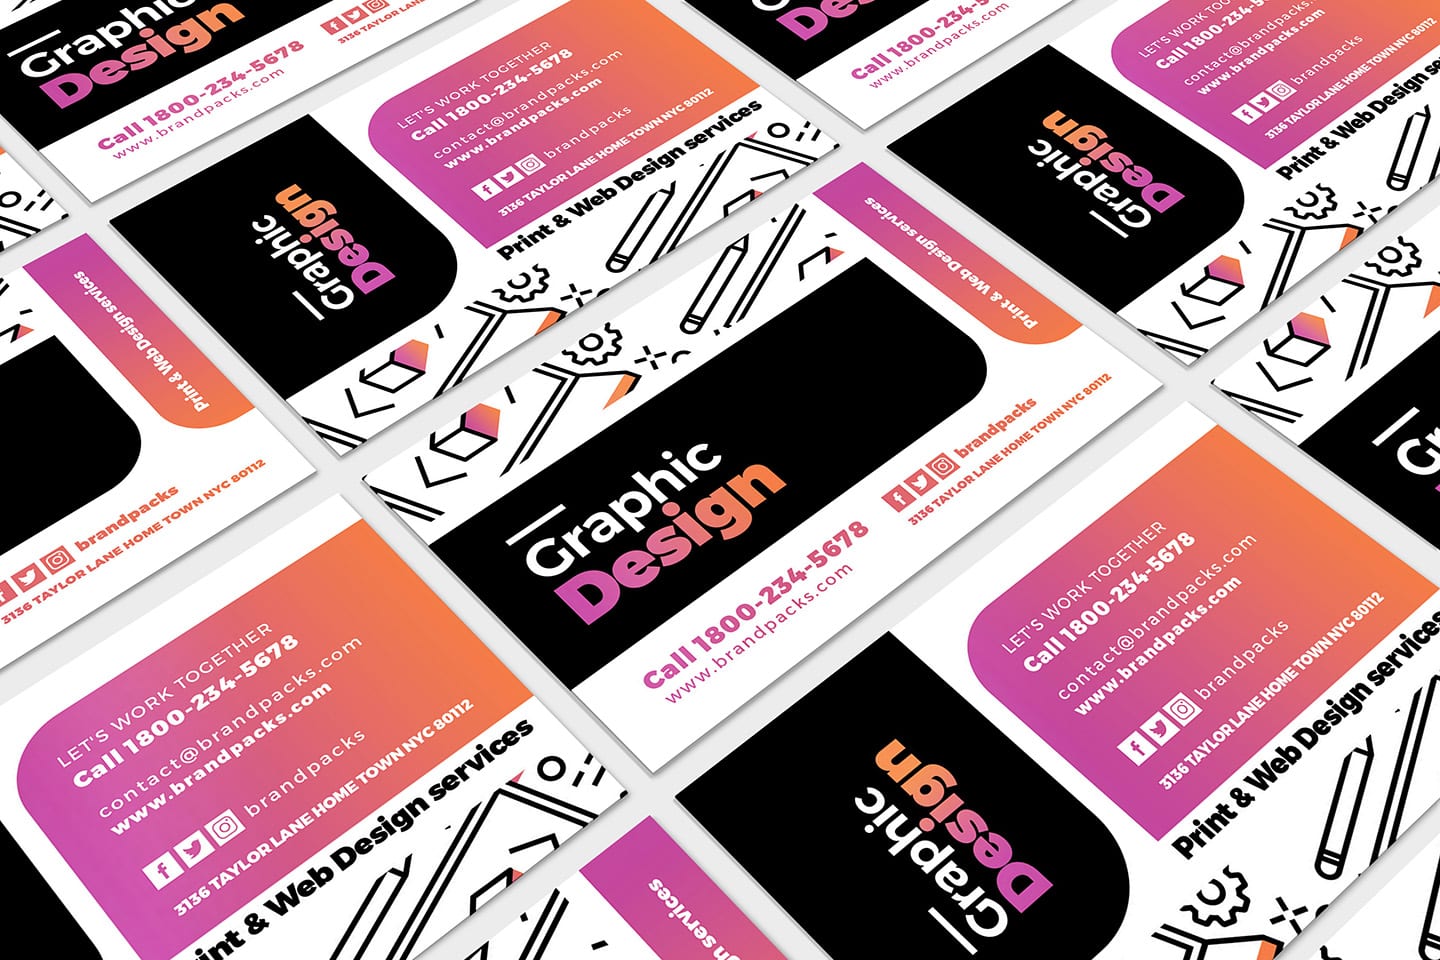 Graphic Design Agency Business Card Template - BrandPacks